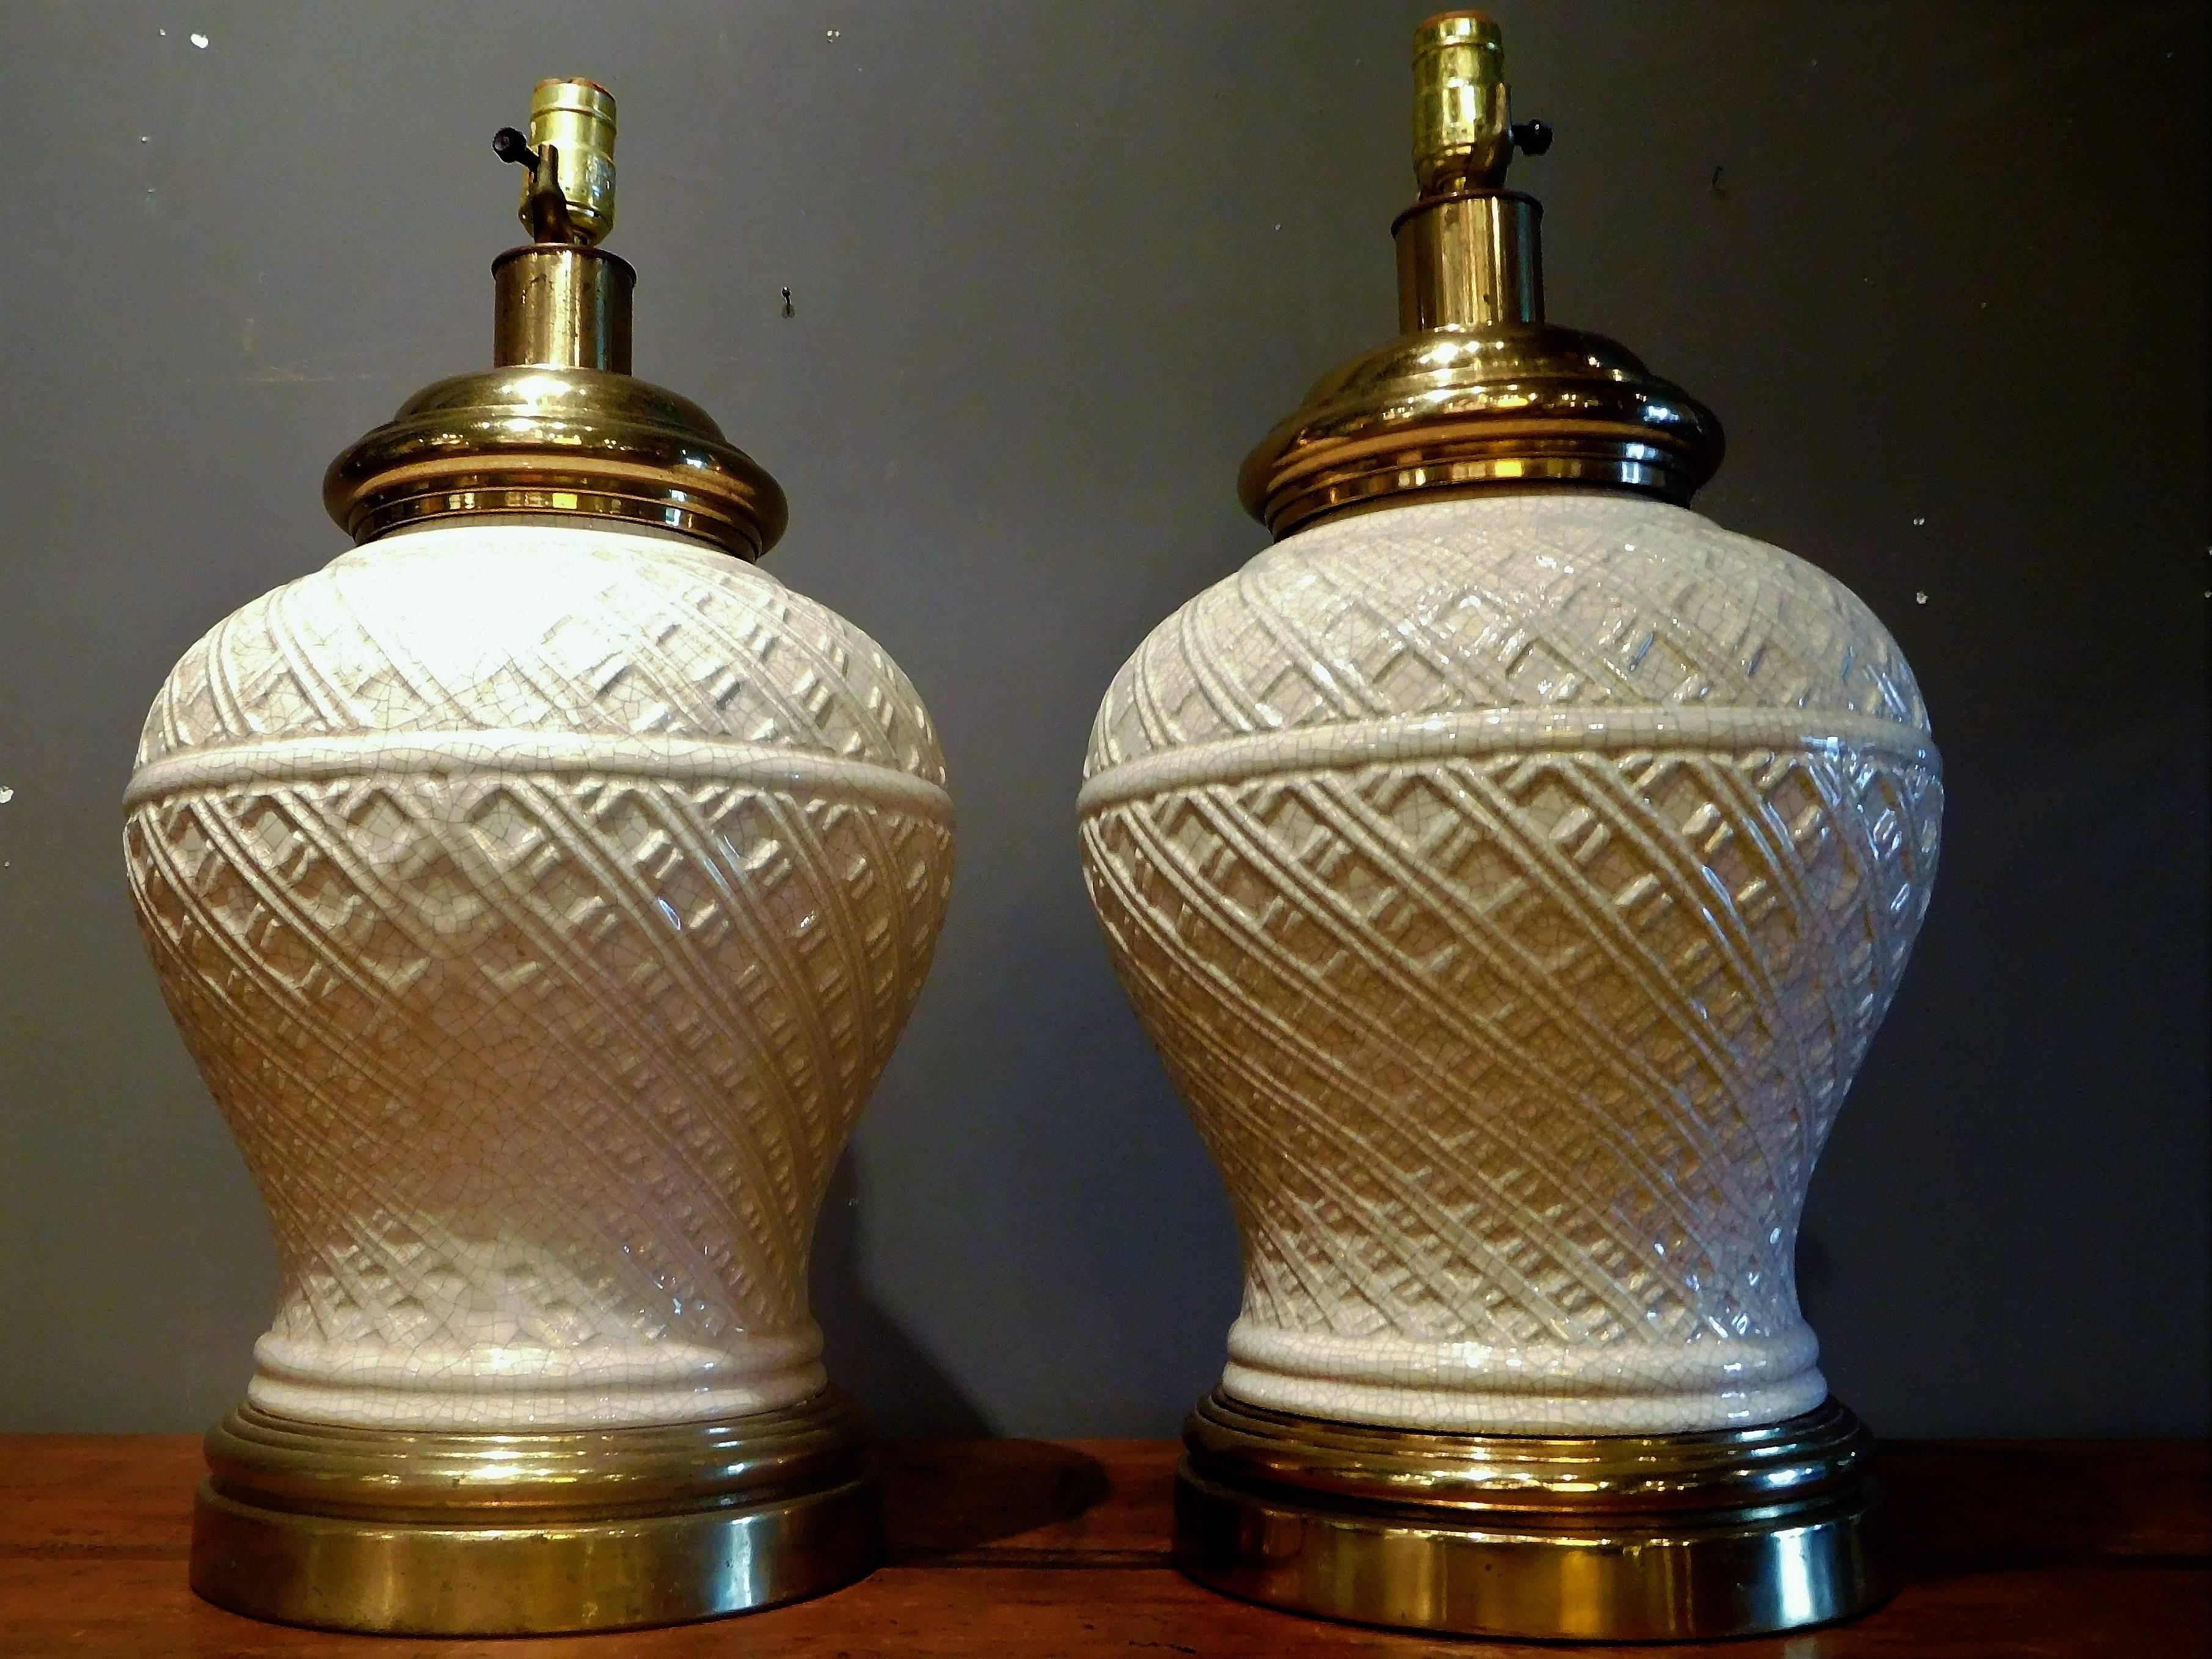 Pair of Ceramic Basket-Weave Paul Hanson Lamps with Ivory Crackle Glaze, 1955 In Good Condition For Sale In Quechee, VT